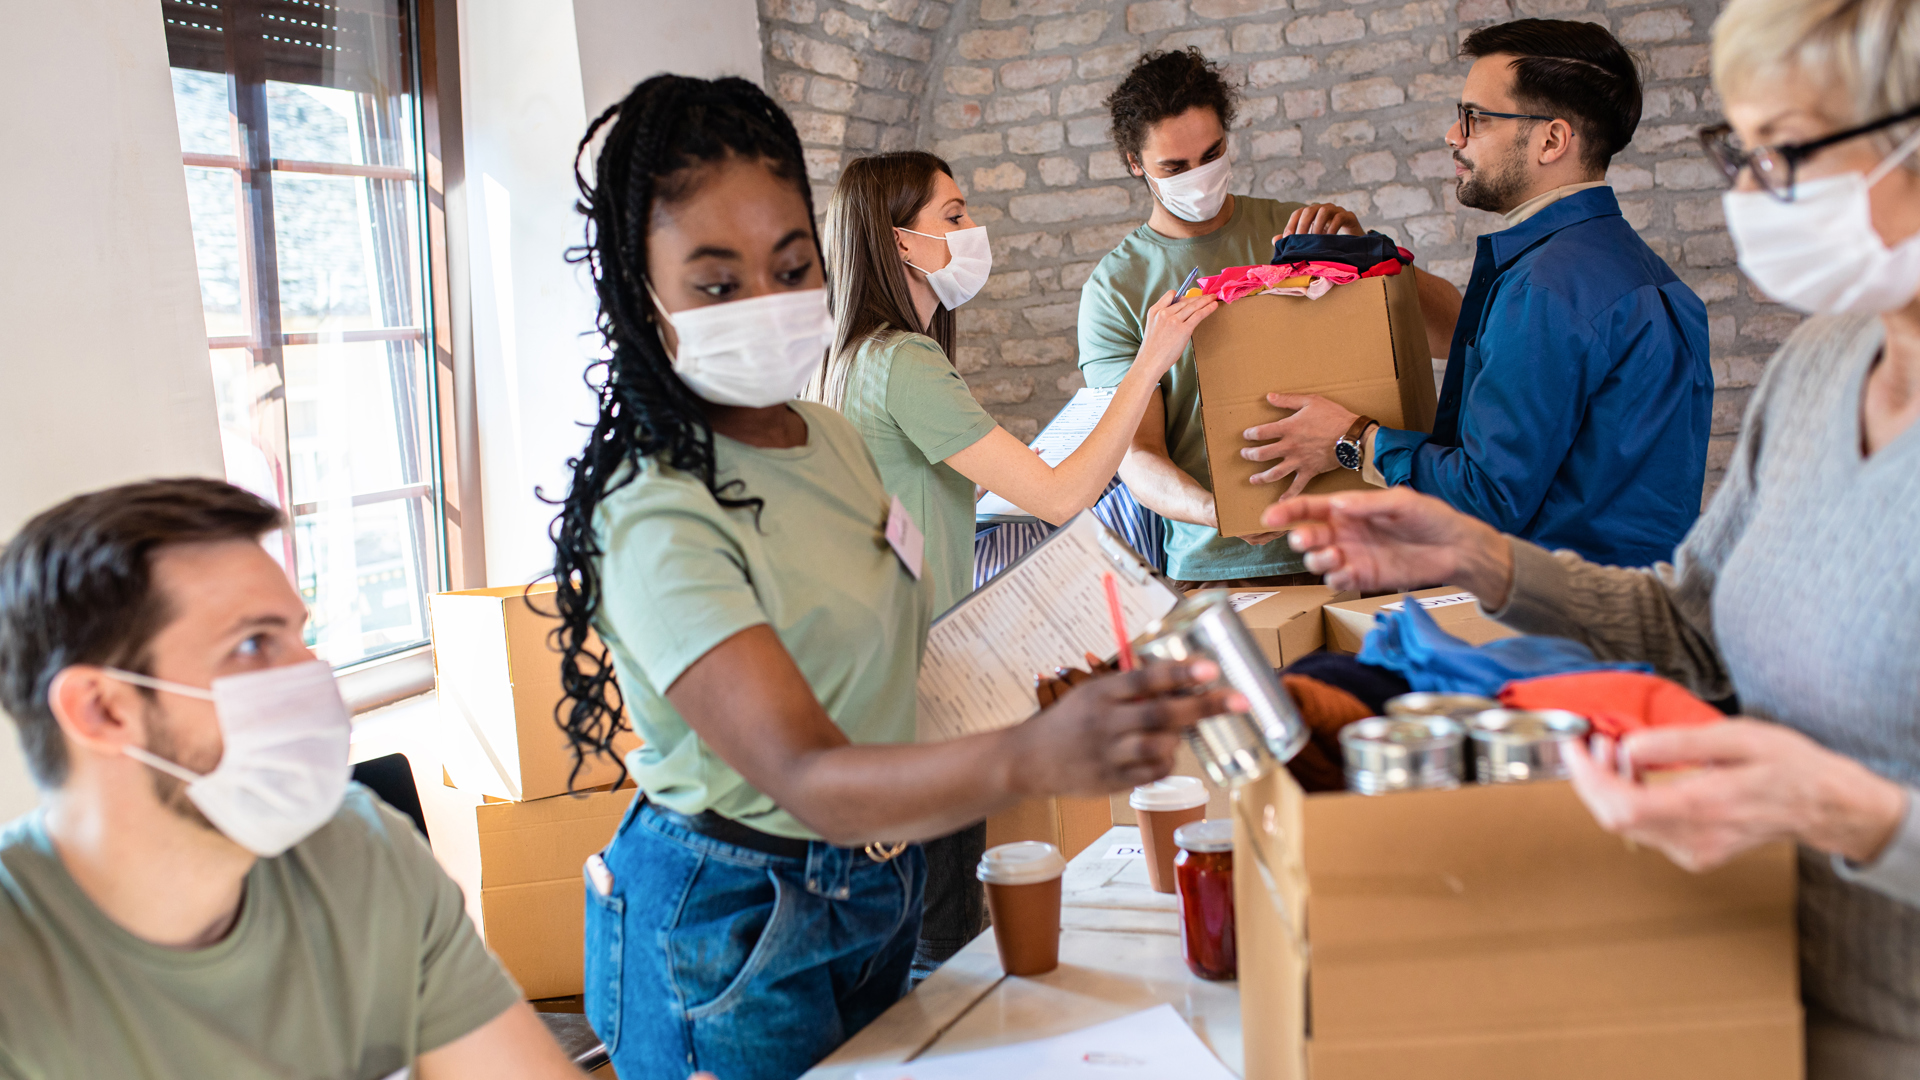 According to Fidelity Charitable, the summer months usually see lower volunteer numbers and donations for nonprofits, often when demand is at a high.